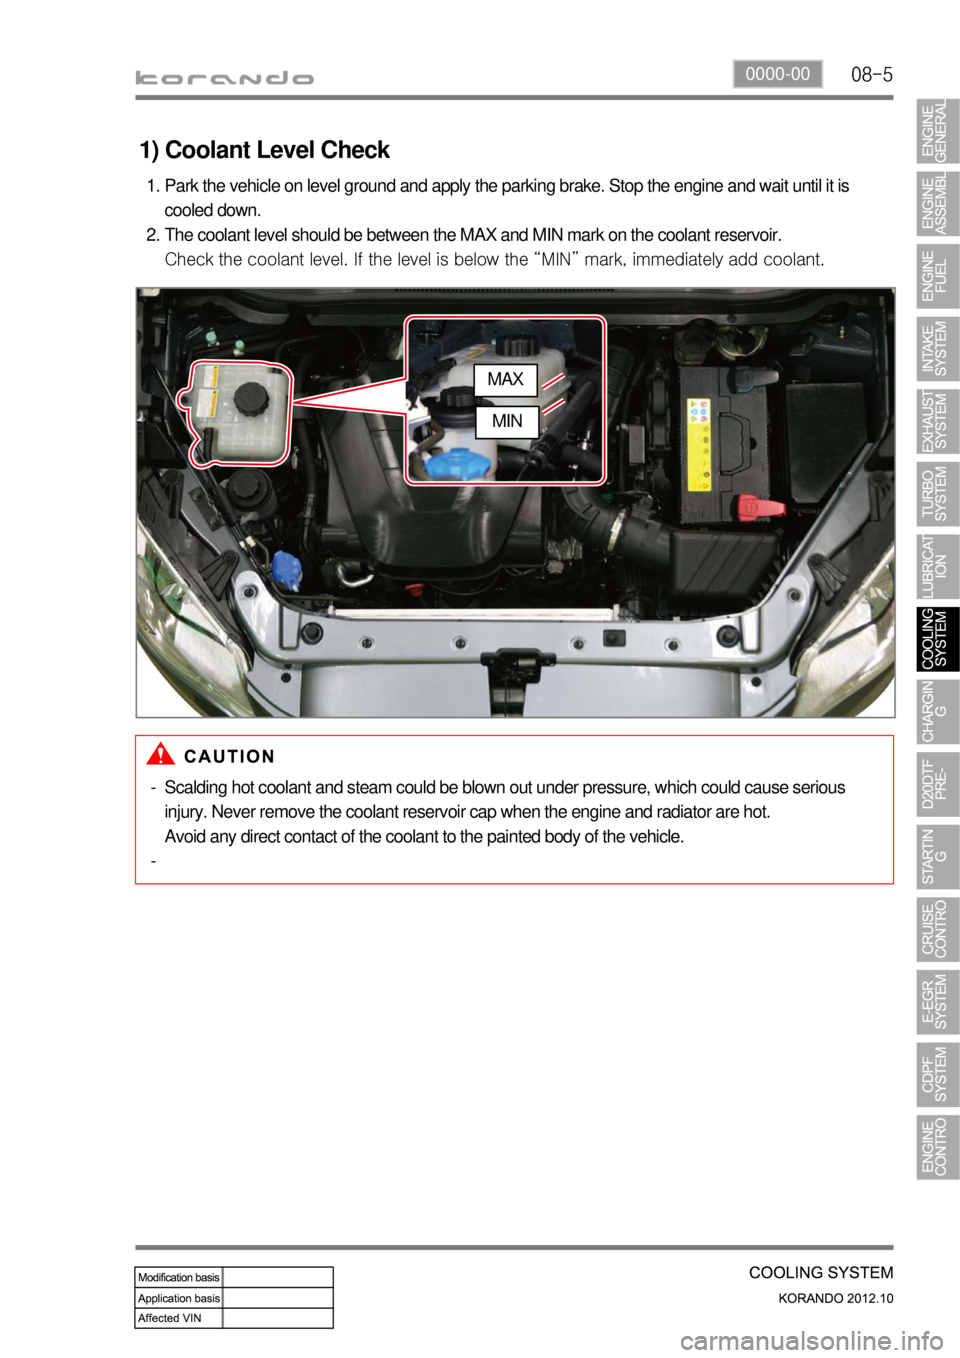 SSANGYONG KORANDO 2012  Service Manual 08-50000-00
1) Coolant Level Check
Park the vehicle on level ground and apply the parking brake. Stop the engine and wait until it is 
cooled down.
The coolant level should be between the MAX and MIN 